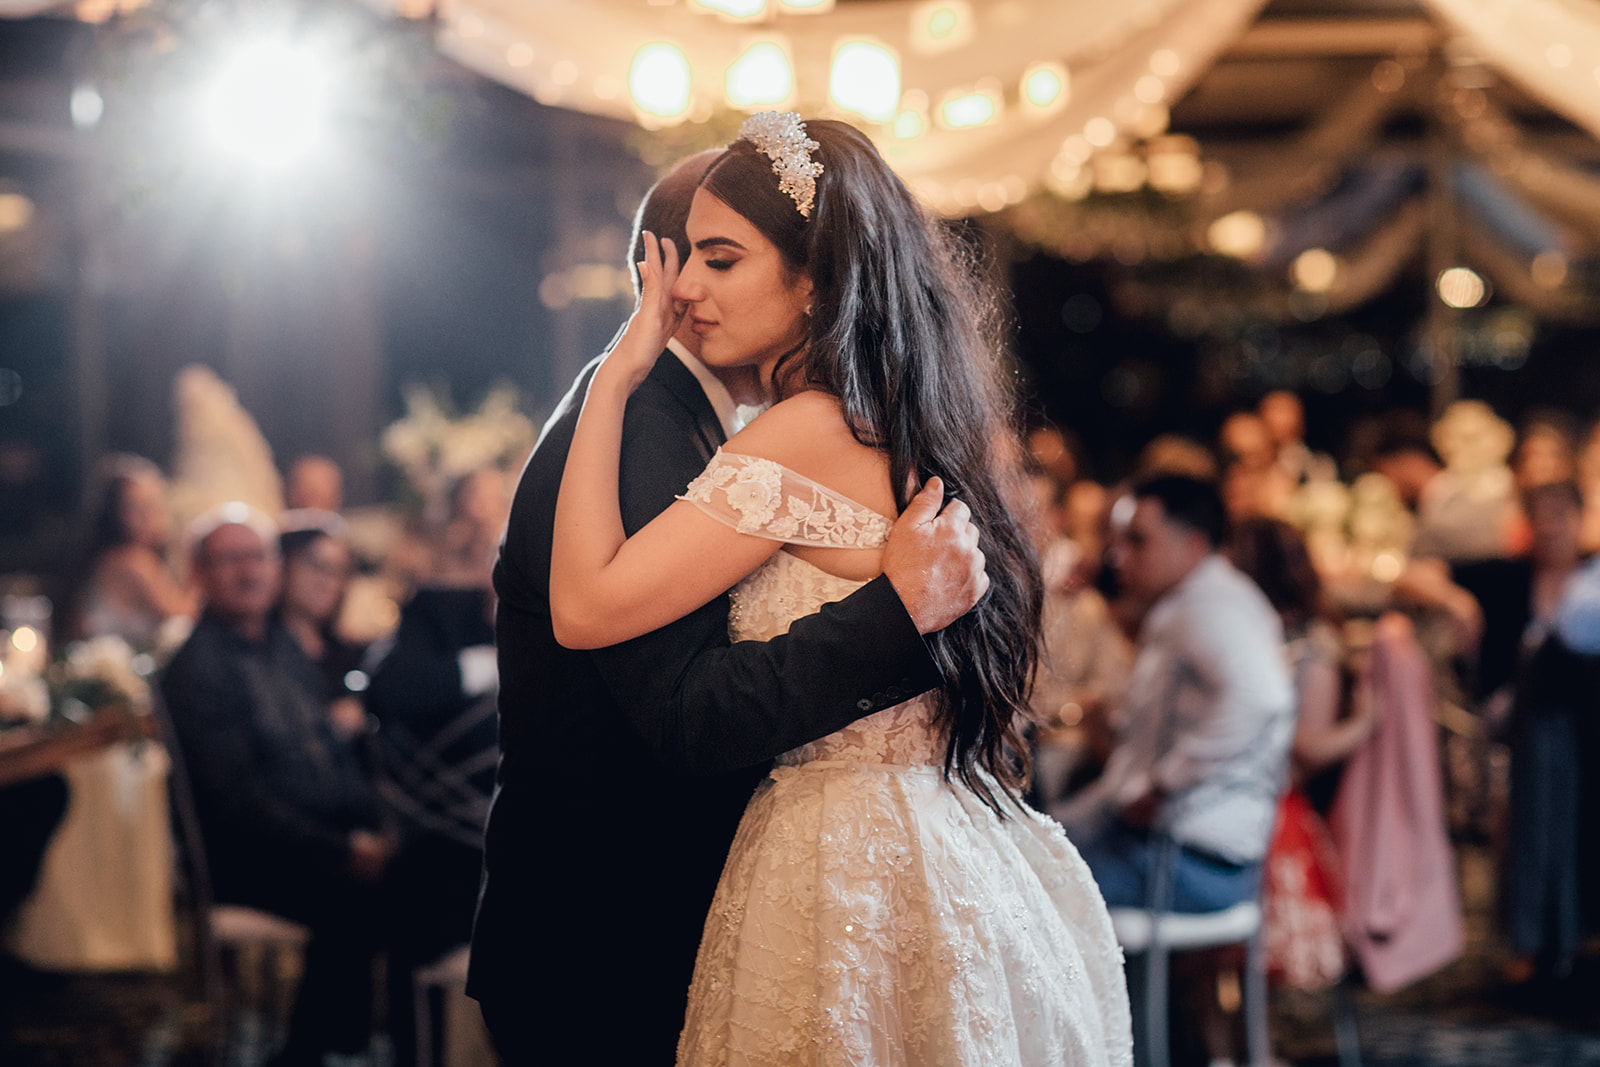 Father-Daughter Dance during Wedding Reception 